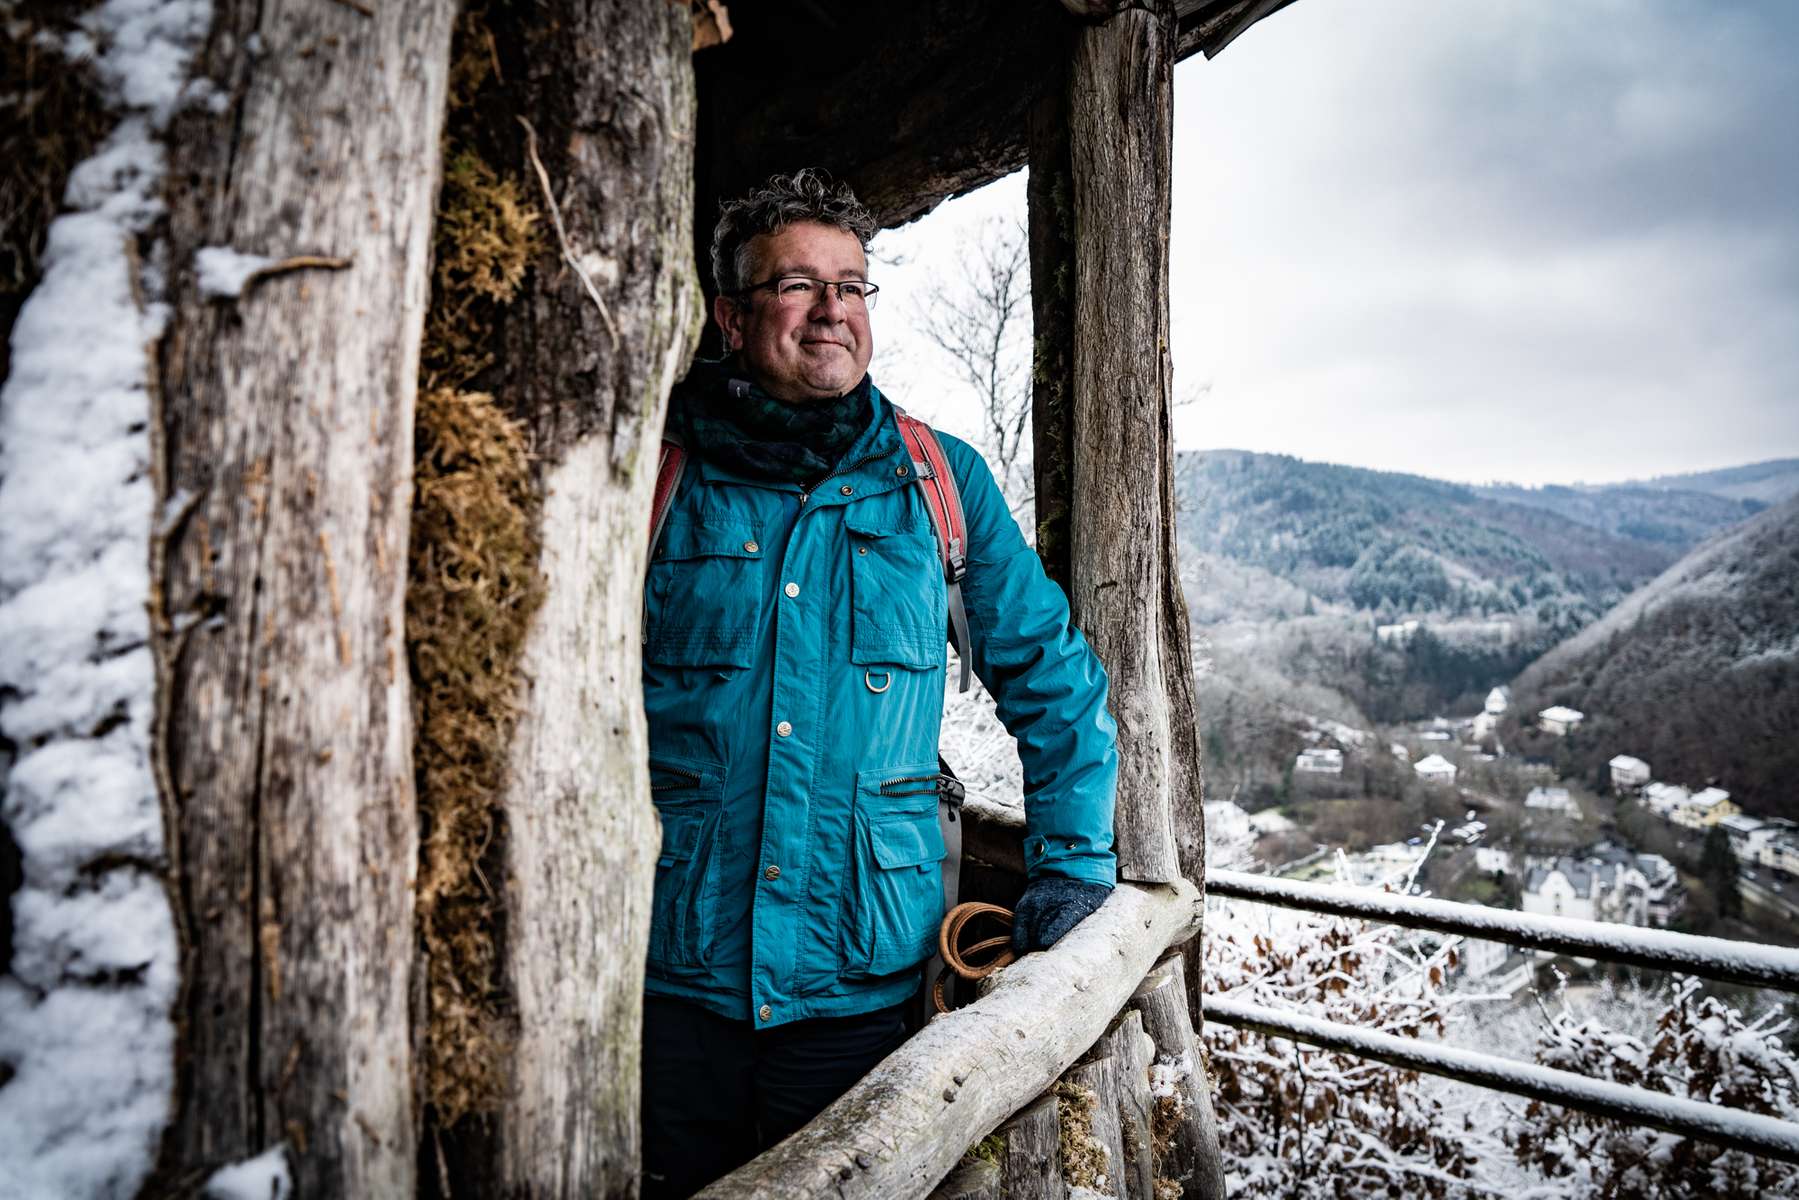 Germany's best known hiker Manuel Andrack is viewing the panorama from a hiking hut in the Vulkaneifel region in Germany